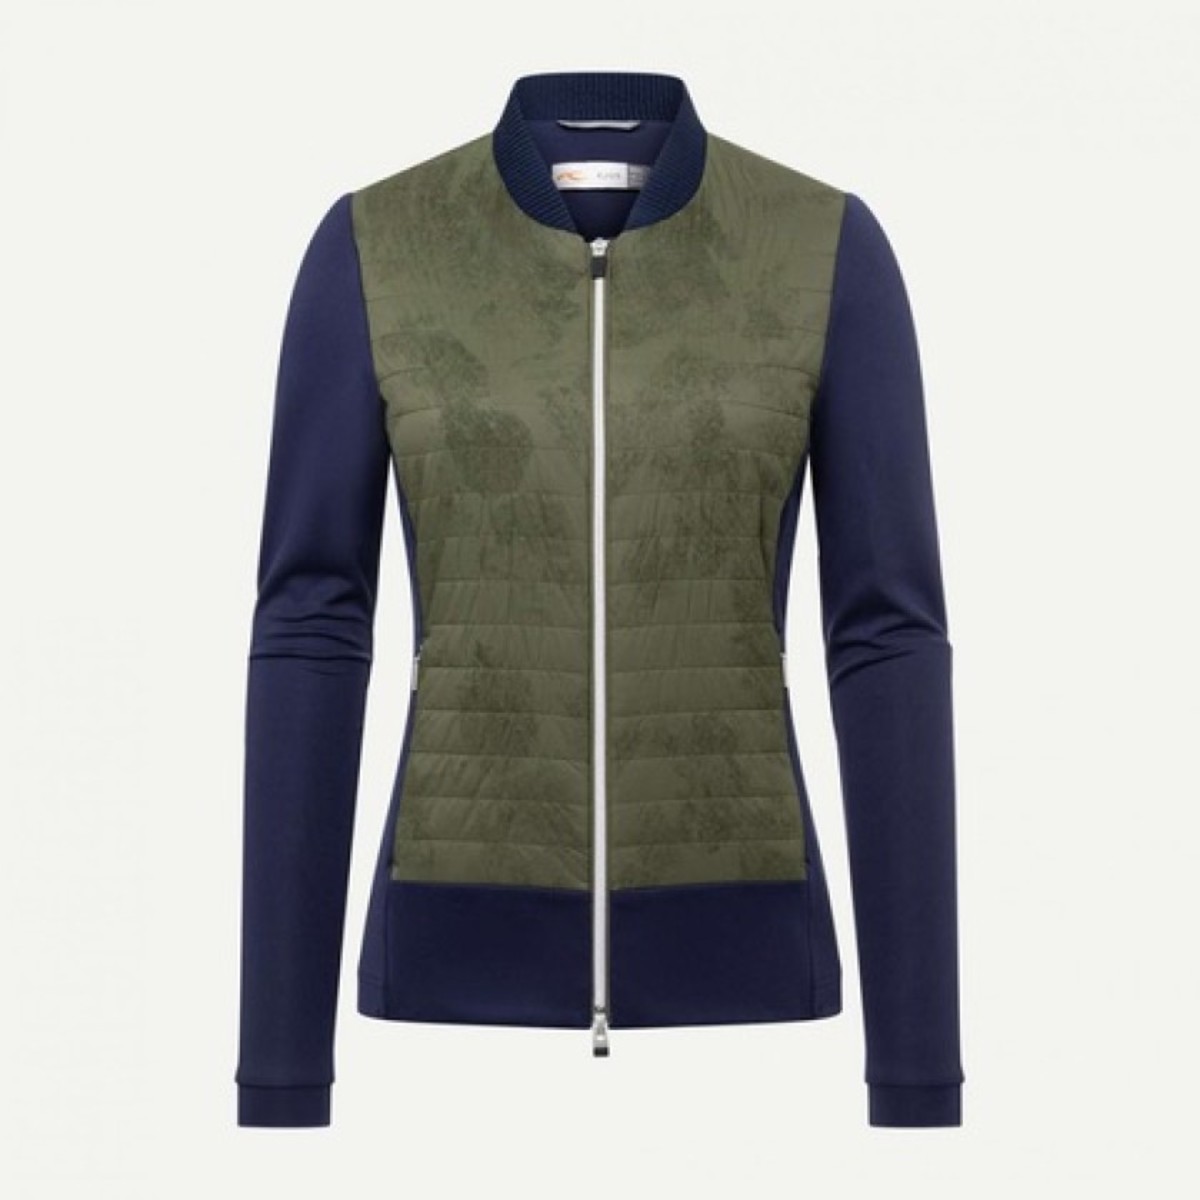 Kjus' Retention printed jacket for women is both stylish and functional.